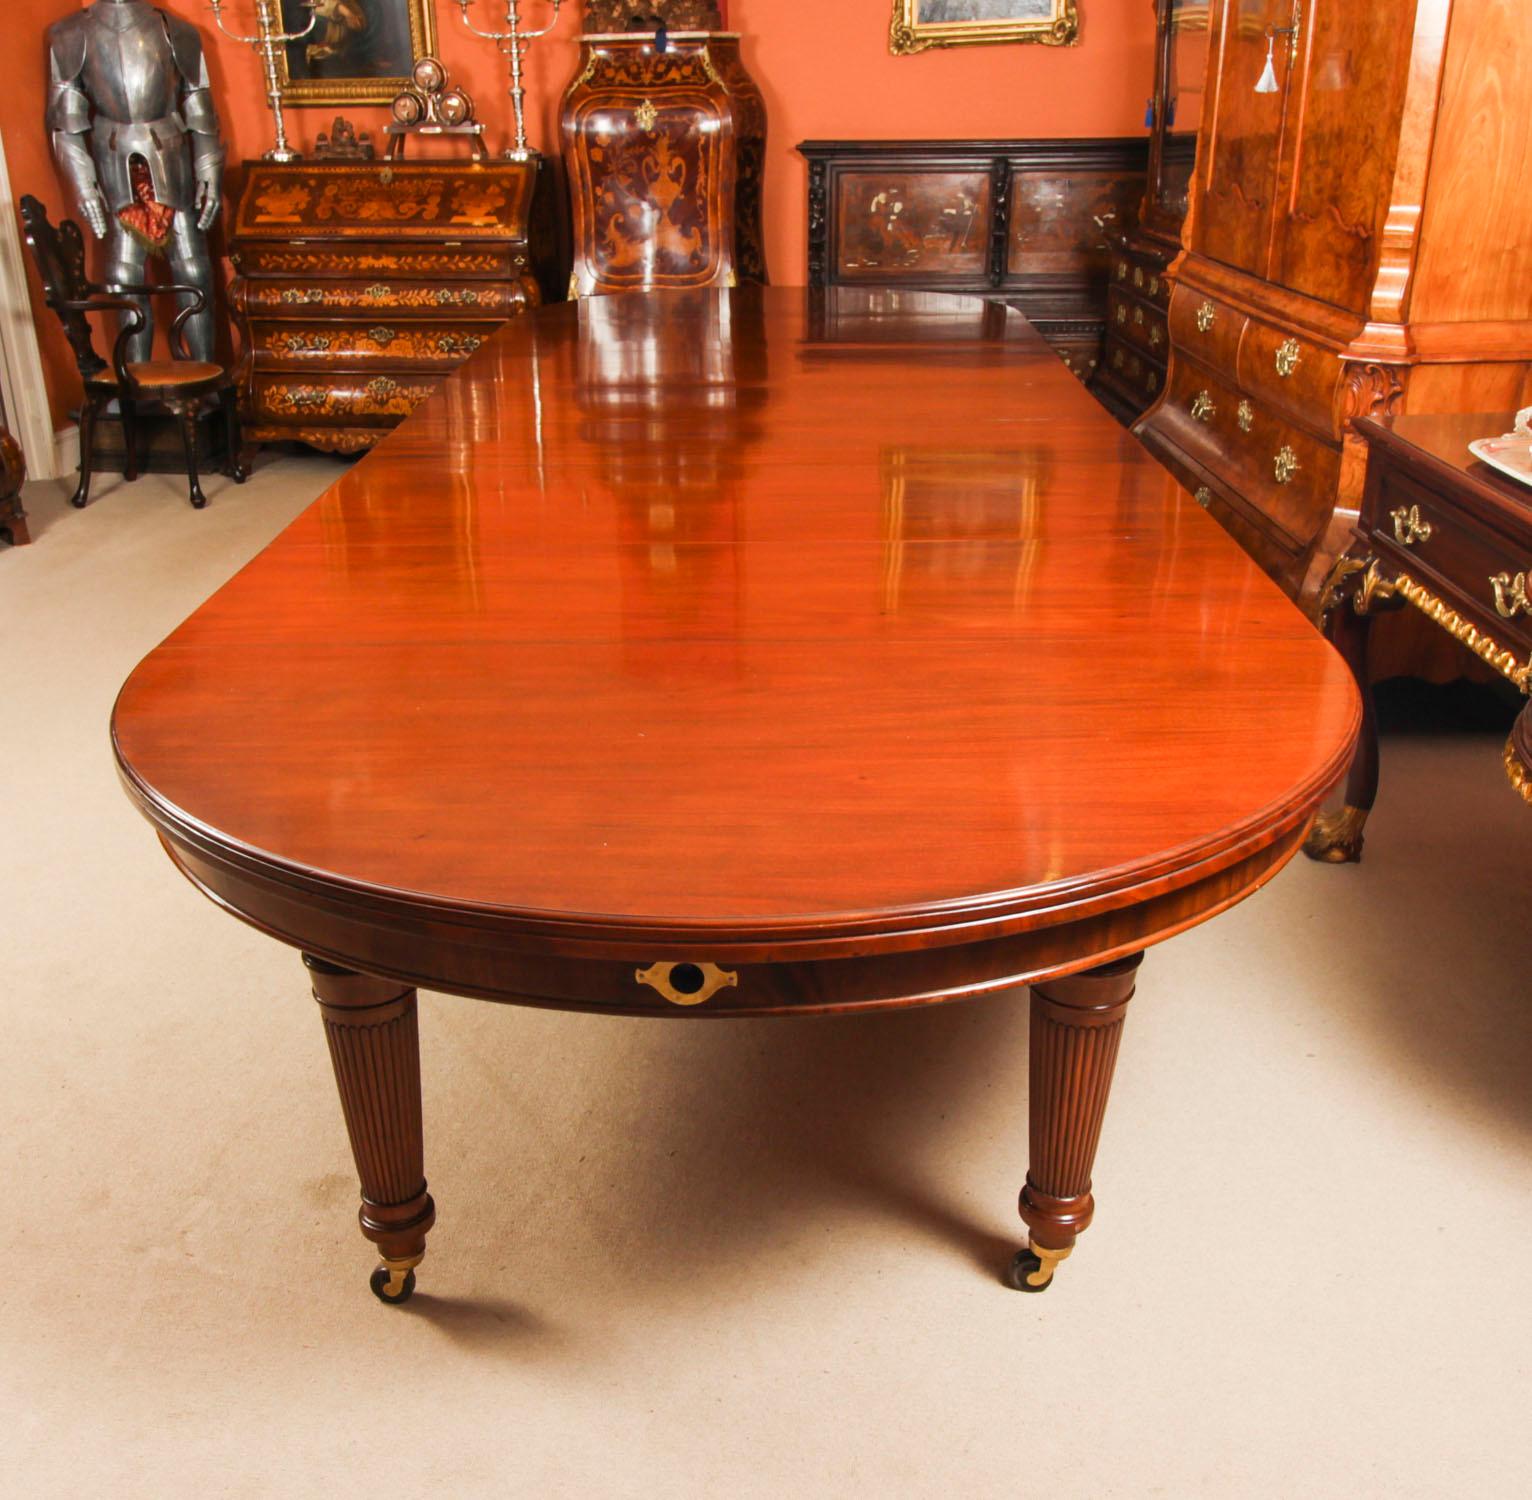 Hand-Crafted Antique 15ft Flame Mahogany Extending Dining Table by Edwards & Roberts 19C